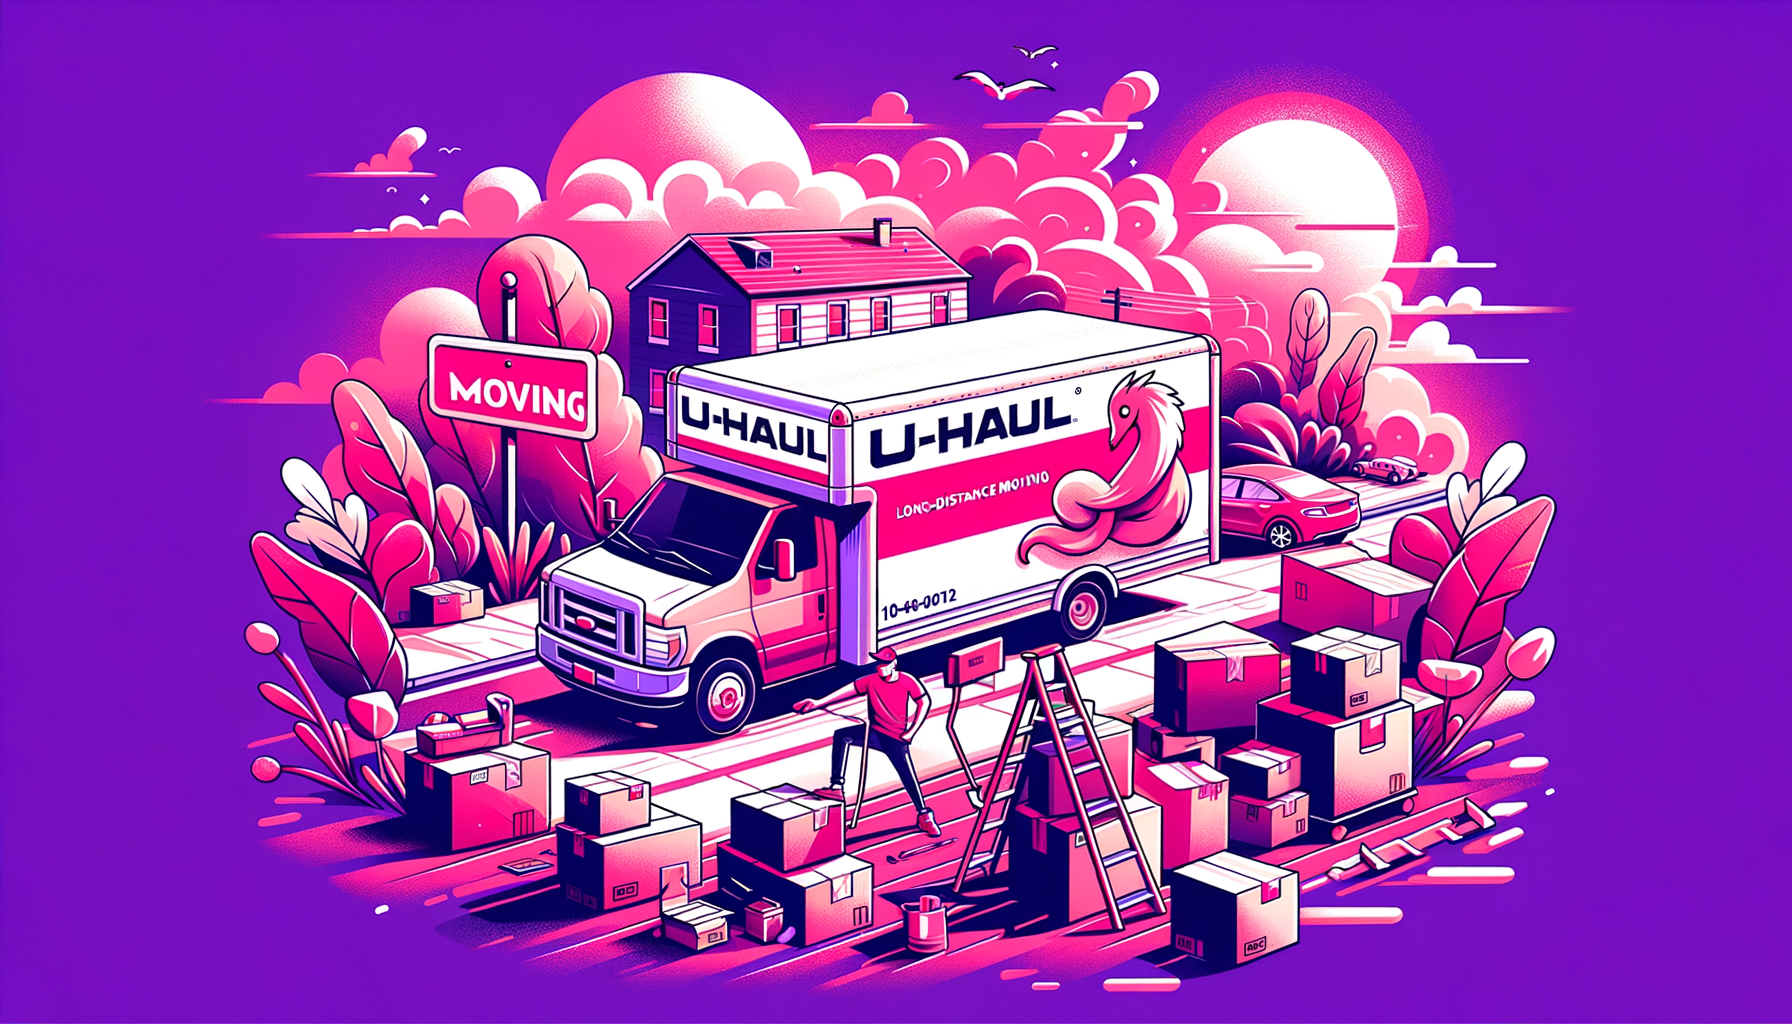 Cartoon-like fuschia-colored U-Haul truck filled with moving boxes illustrating the concept of DIY long-distance moving.